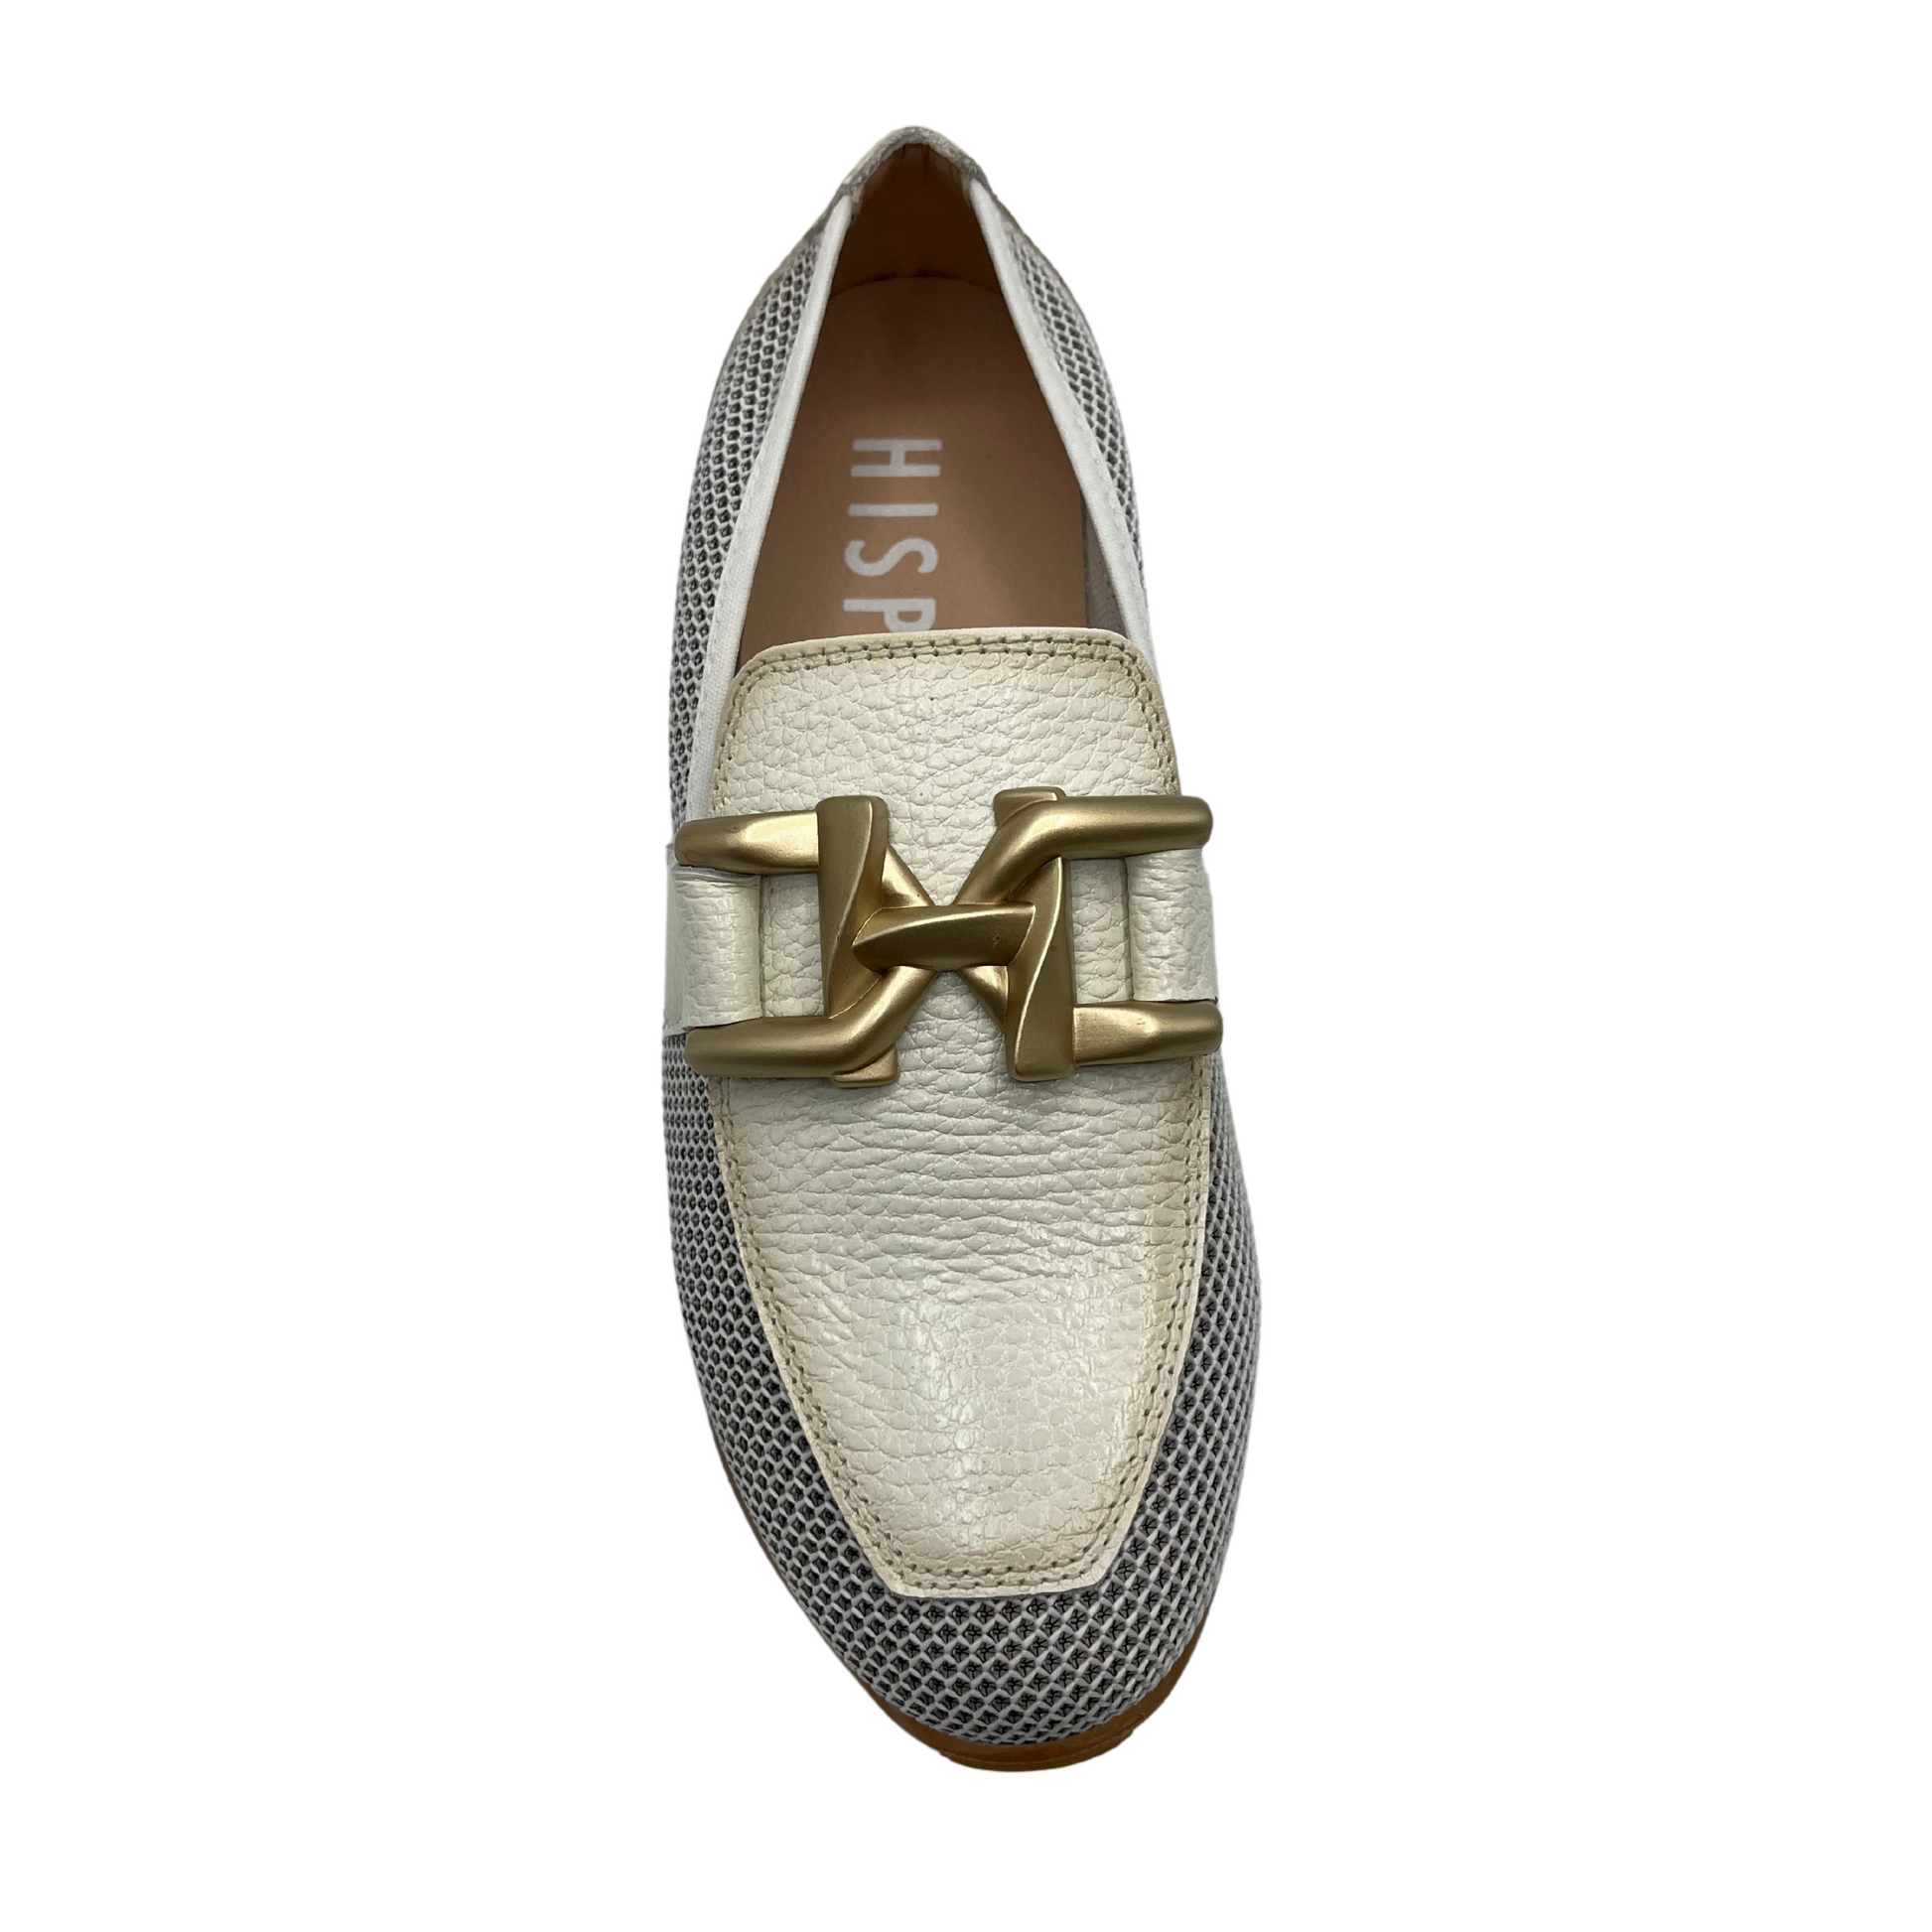 Top view of white coloured loafer sneaker with mesh sides, white rubber sole and gold detail on upper